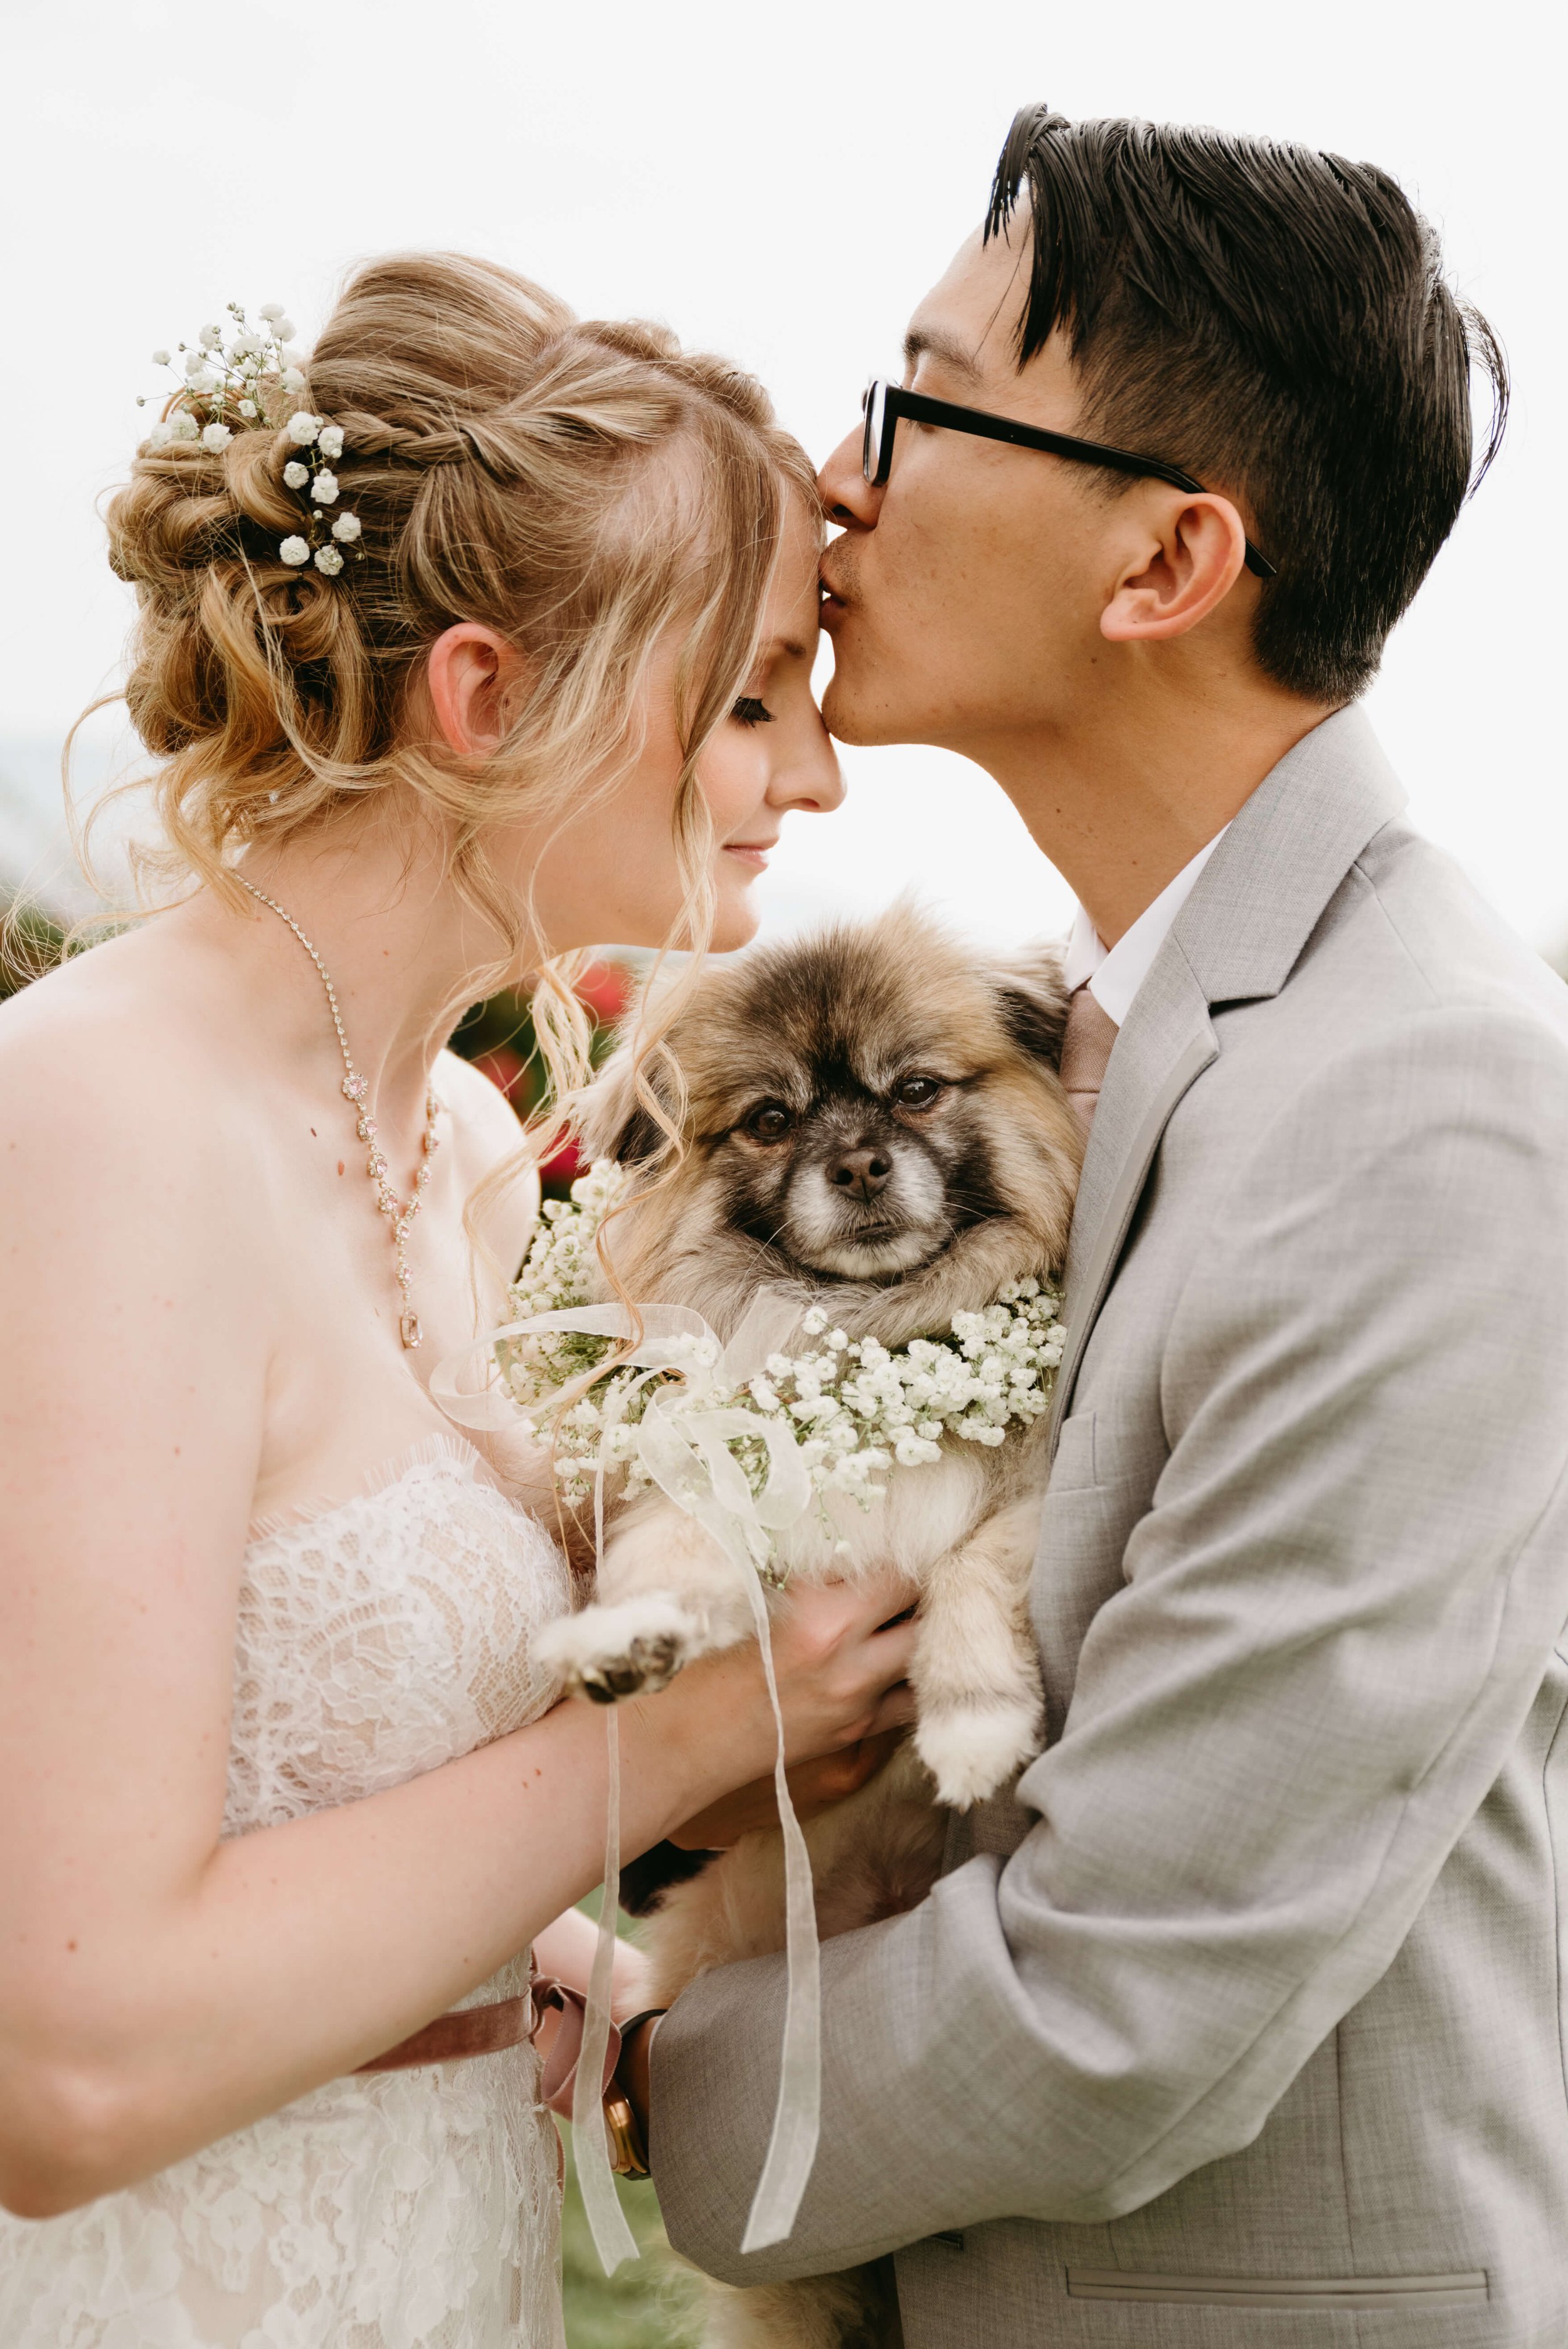 Intimate elopement with small dog photographed by Houston Photographer, J. Andrade Visual Arts